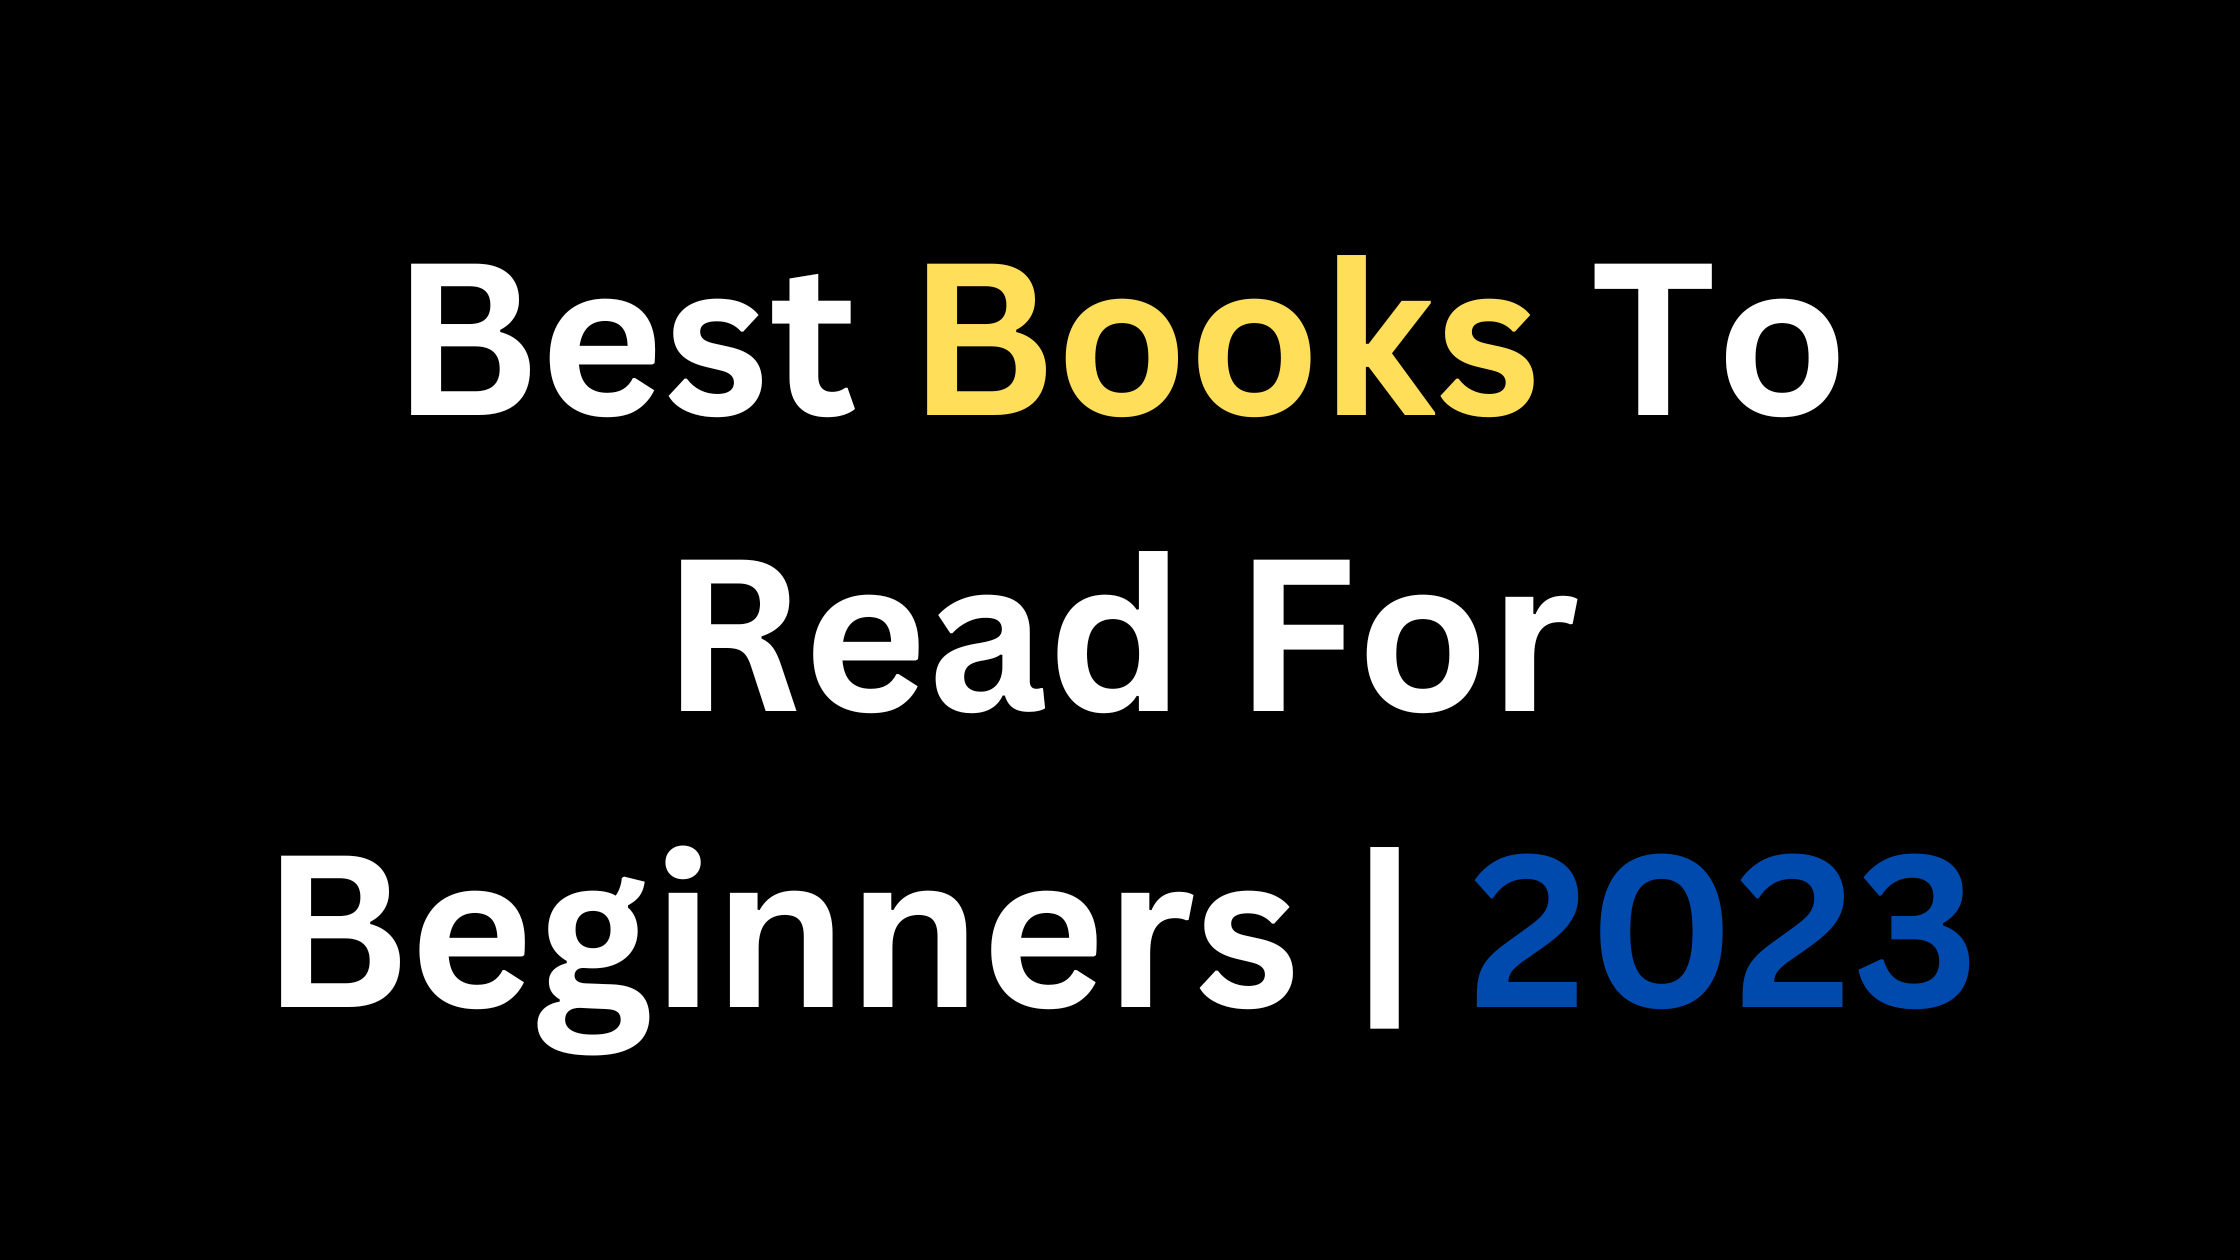 Best Books To Read For Beginners